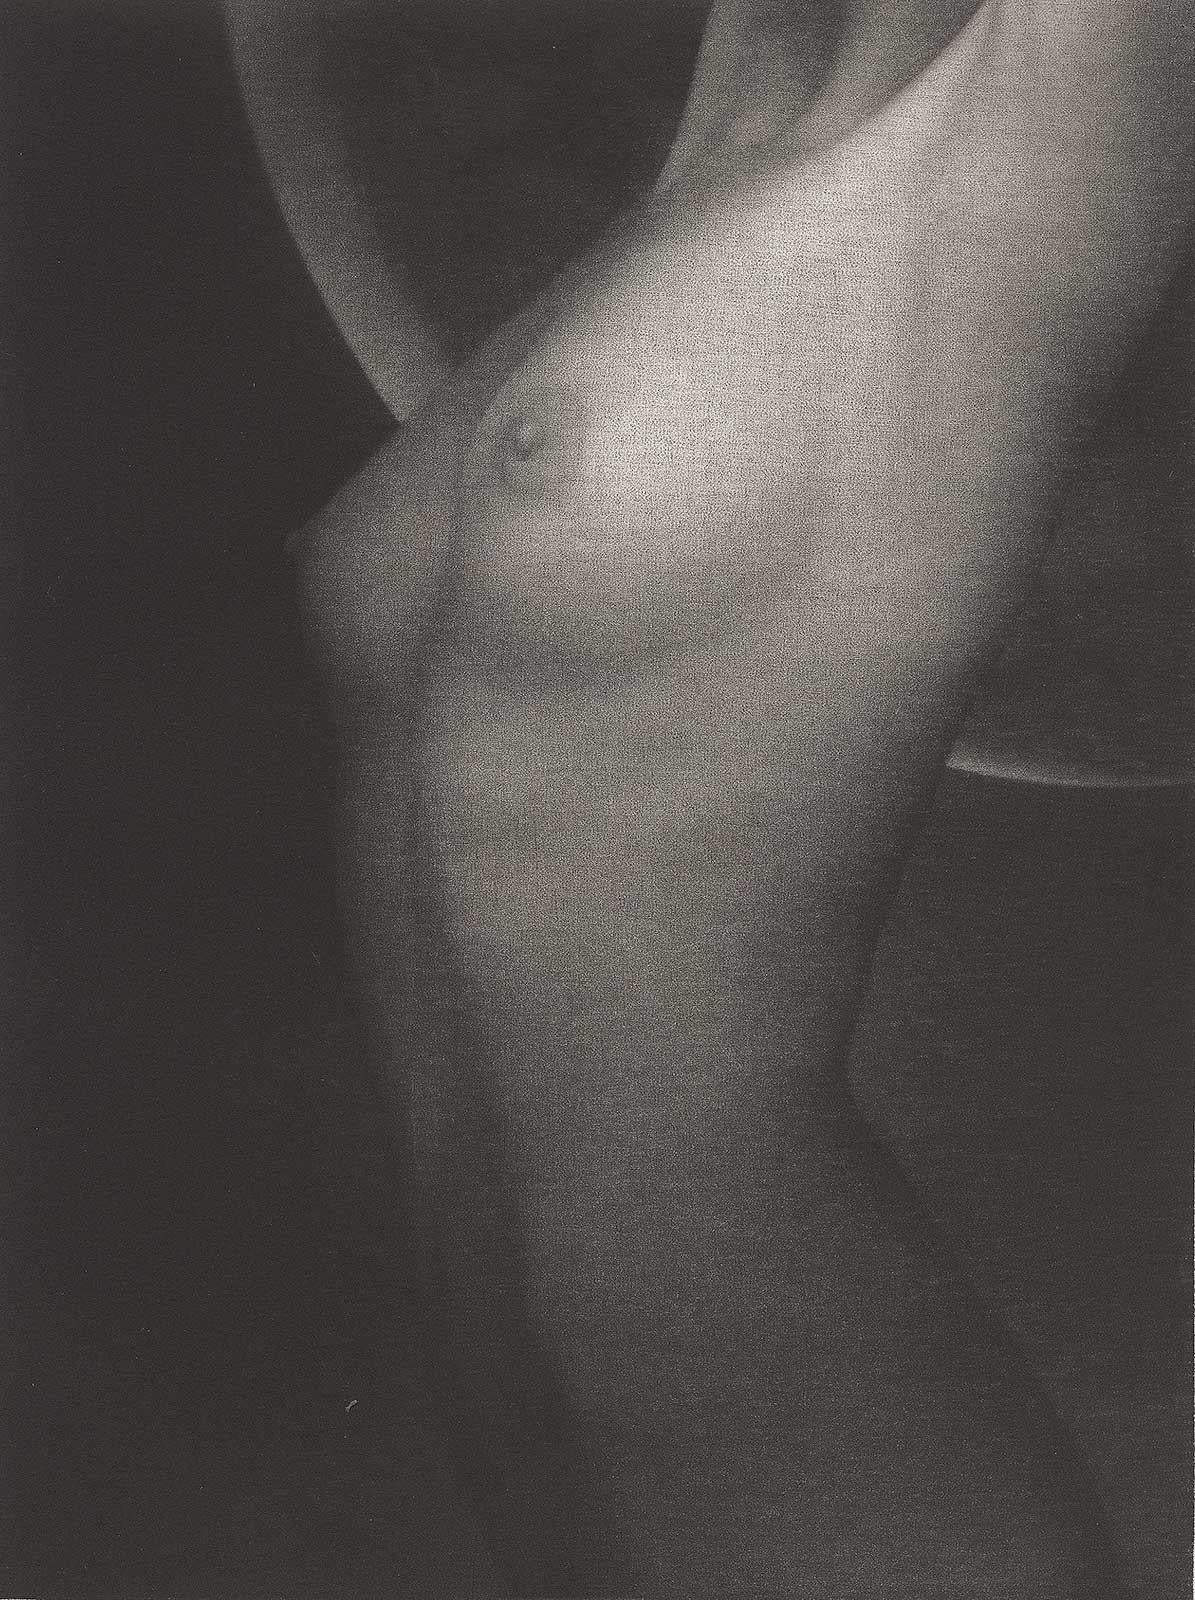 Mikio Watanabe Figurative Print - Moonshine (a young nude woman with big breasts posed in front of huge full moon)